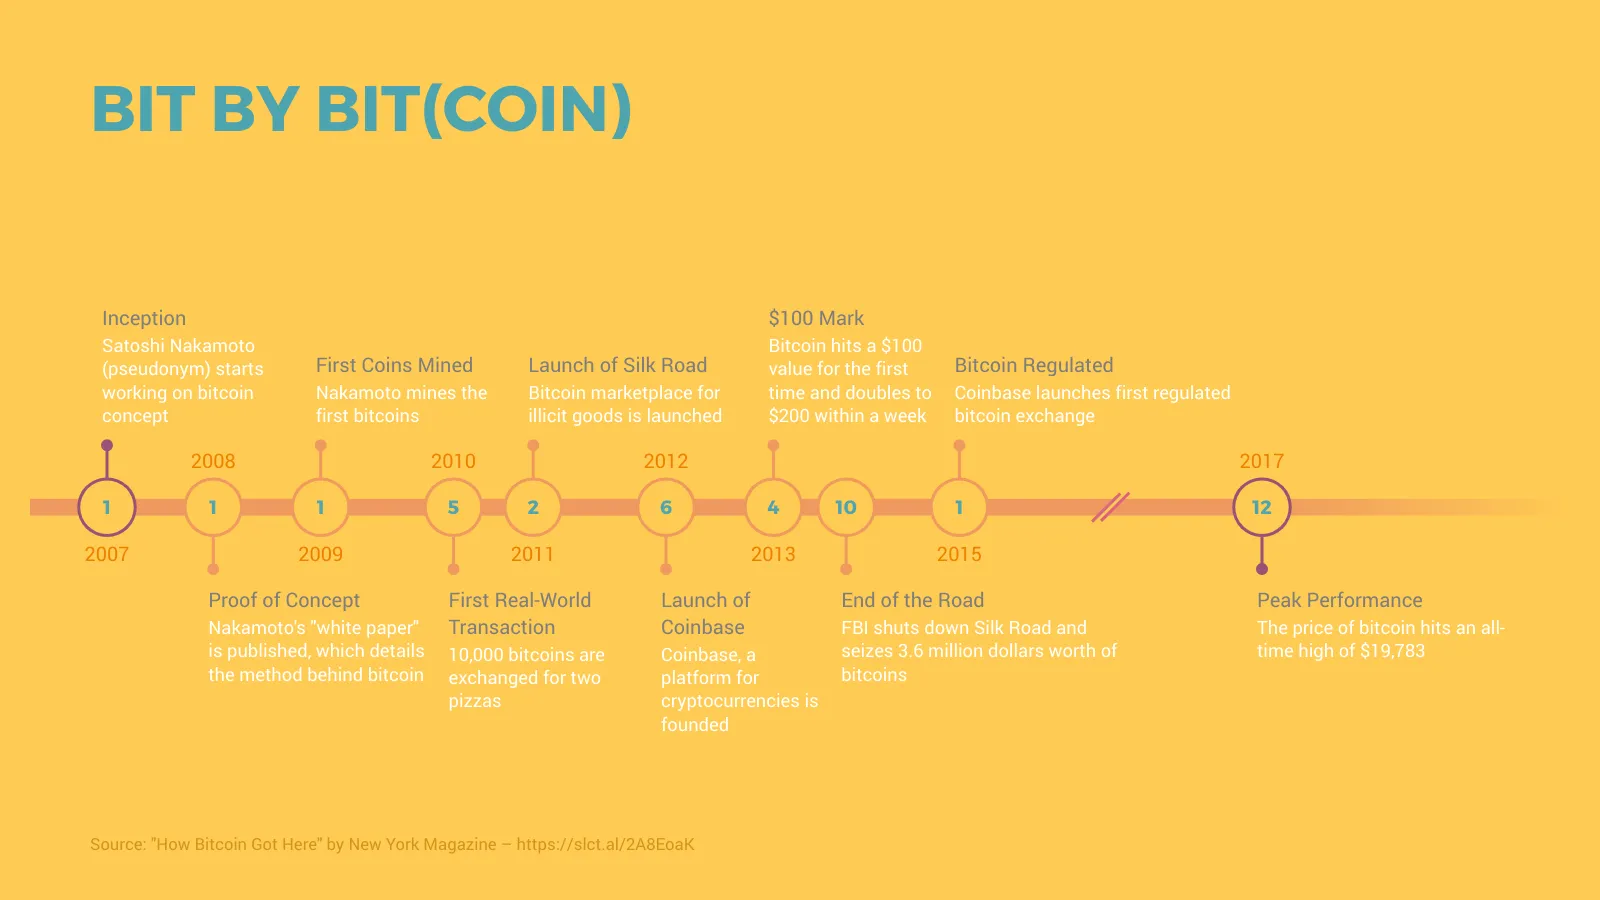 Timeline Chart example: BIT BY BIT(COIN)